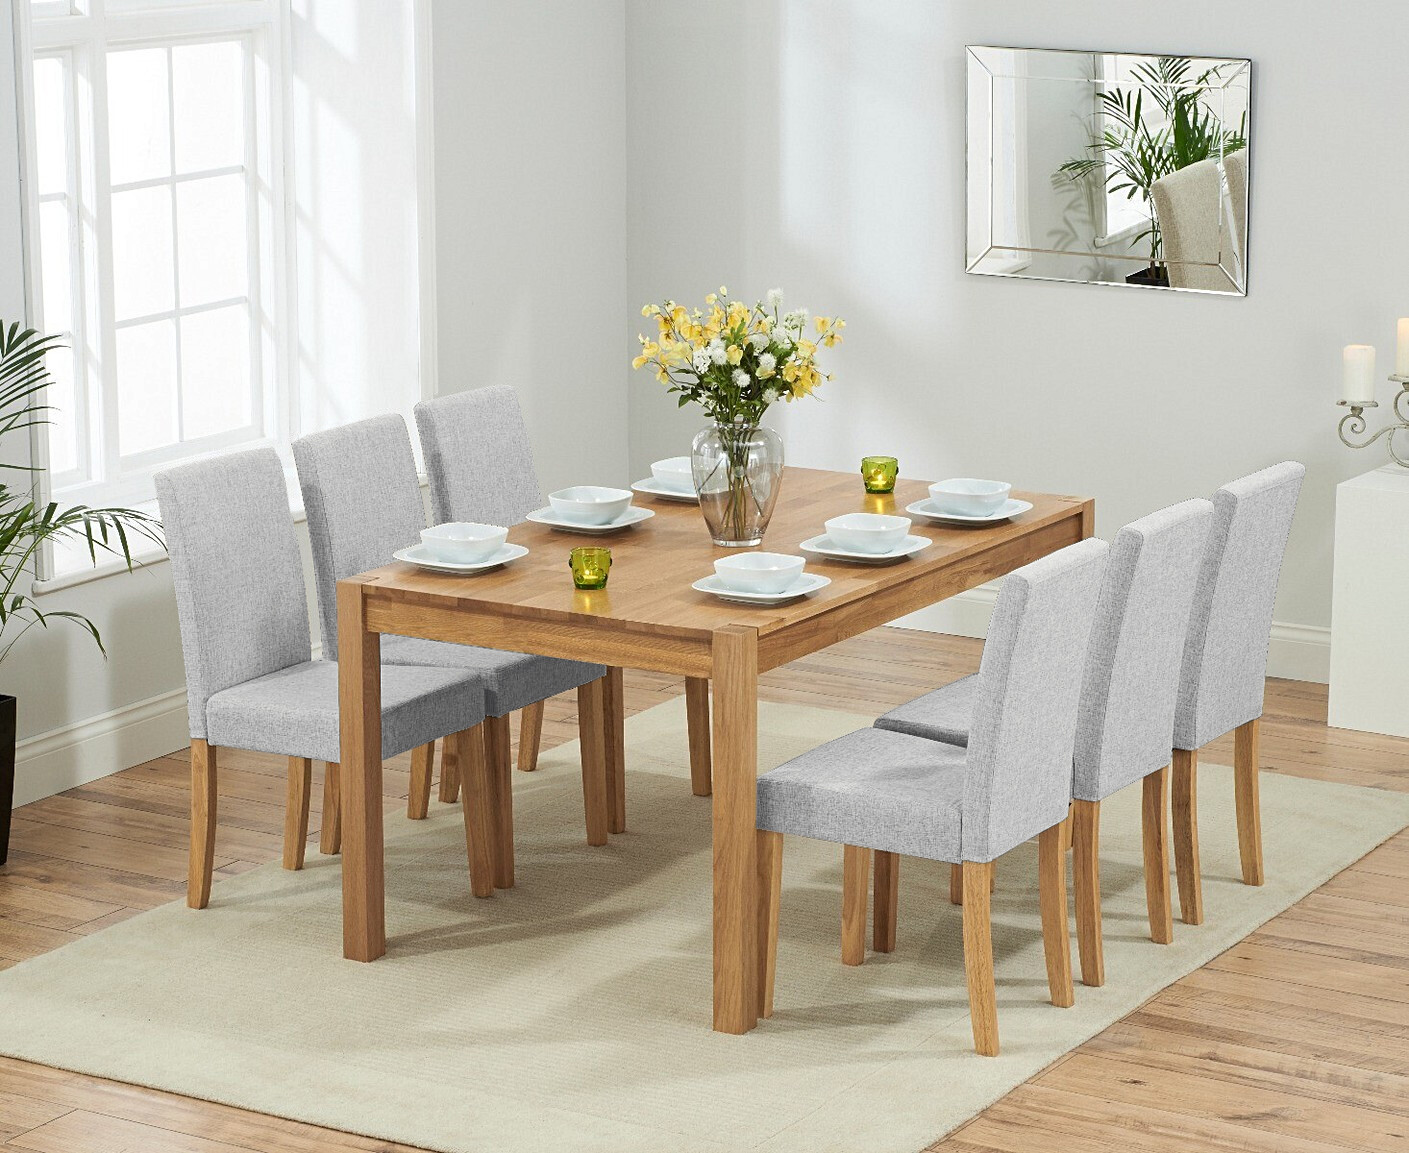 Photo 3 of York 150cm solid oak dining table with 8 grey lila chairs